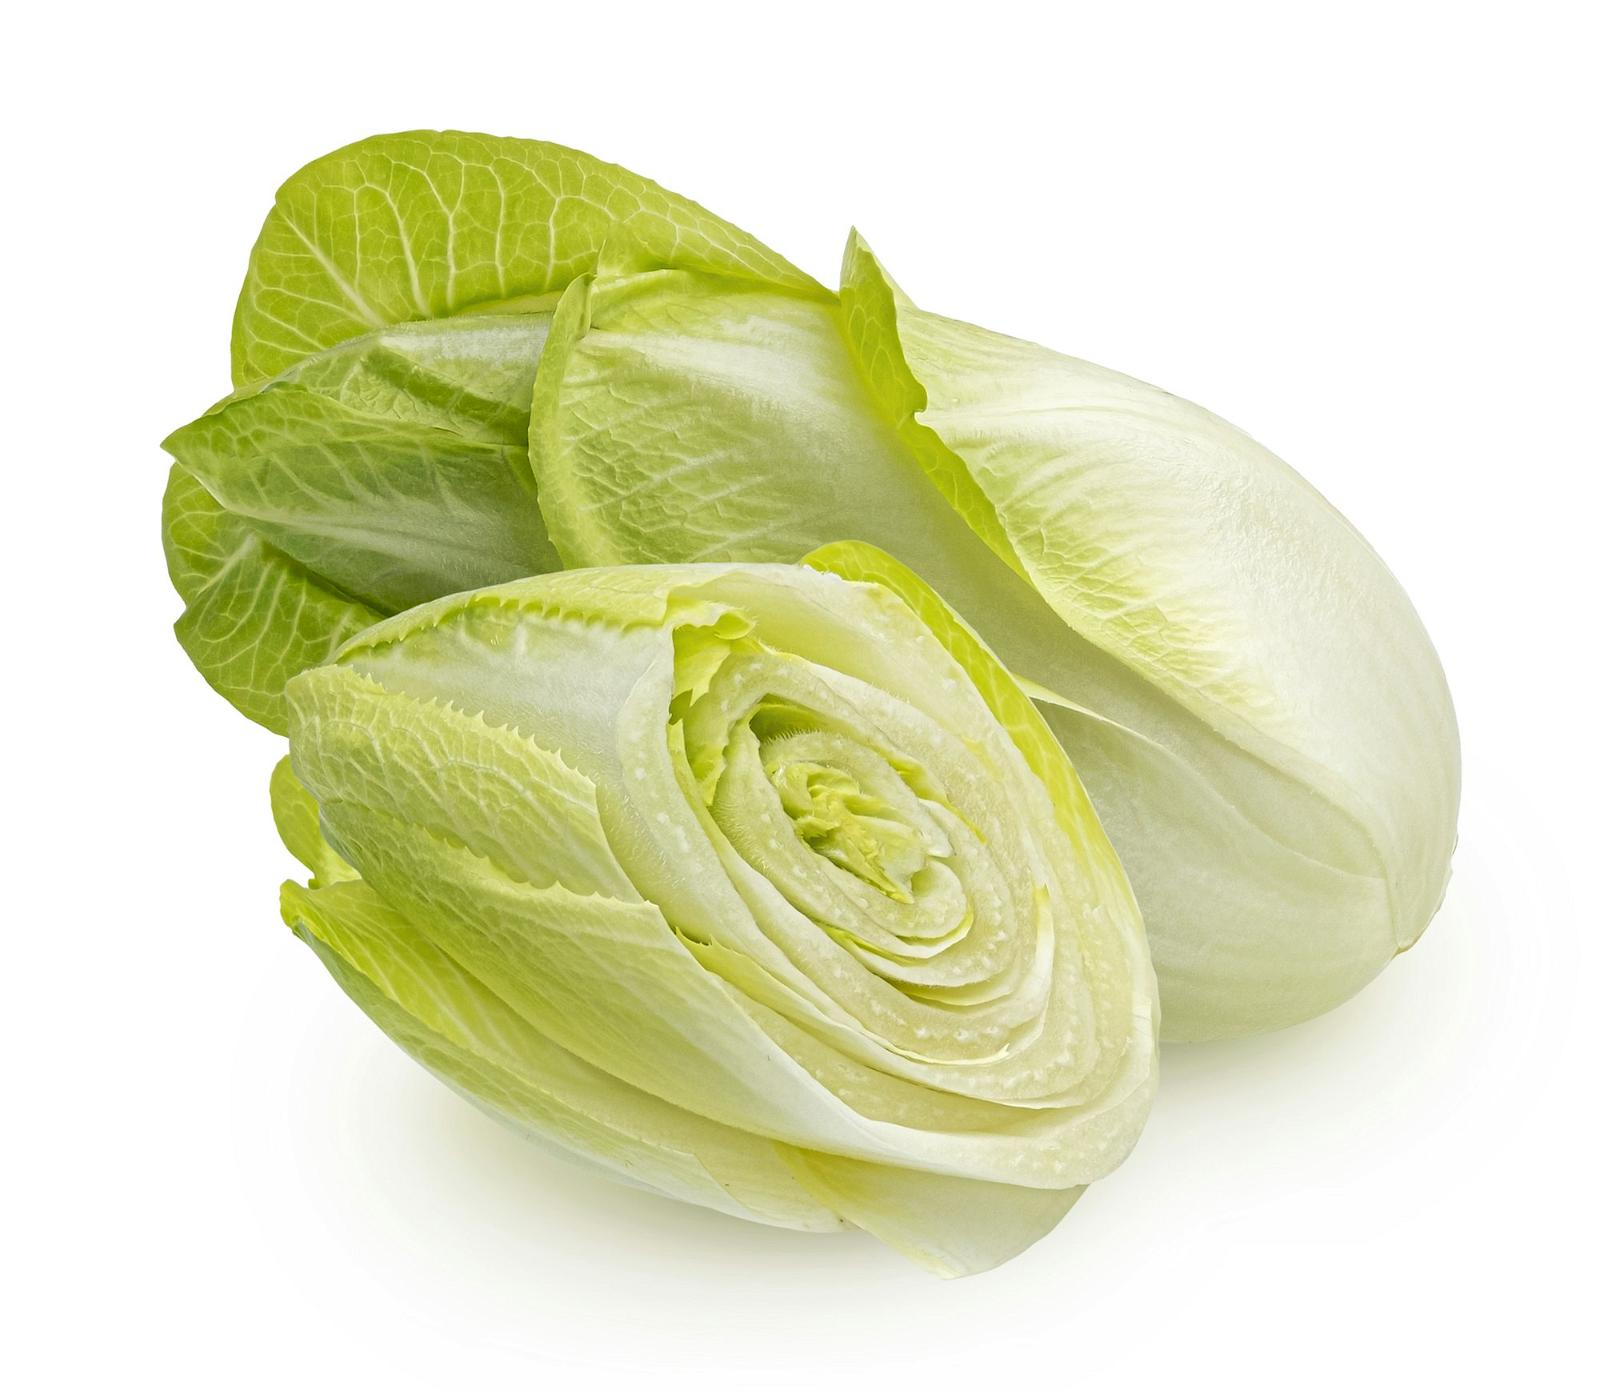 Witlof? What Aussies Call Endive!